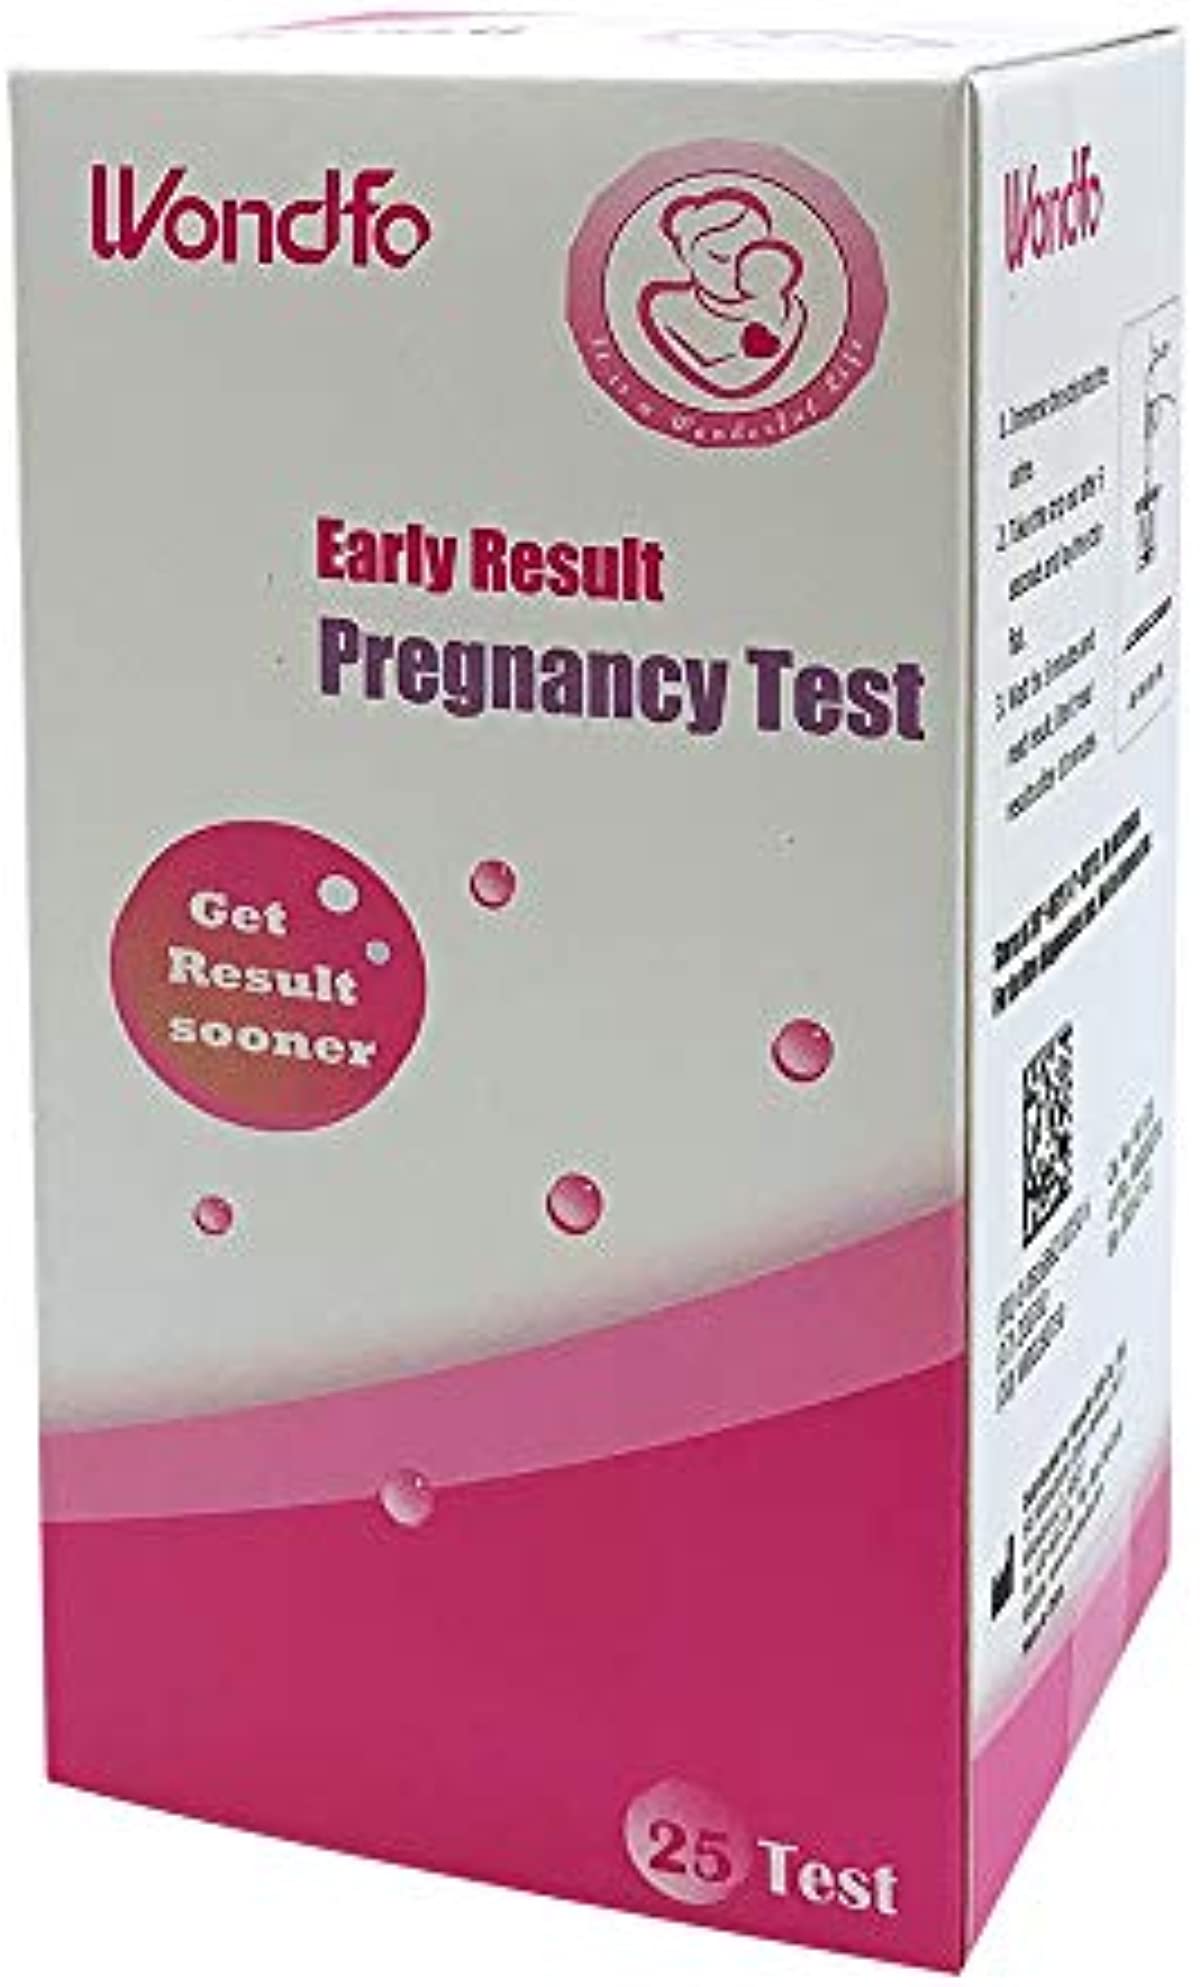 Wondfo Pregnancy Test Strips Early Detection - Extra Sensitive 10 MIU/ML HCG Early Predictor Kit (25 Count)